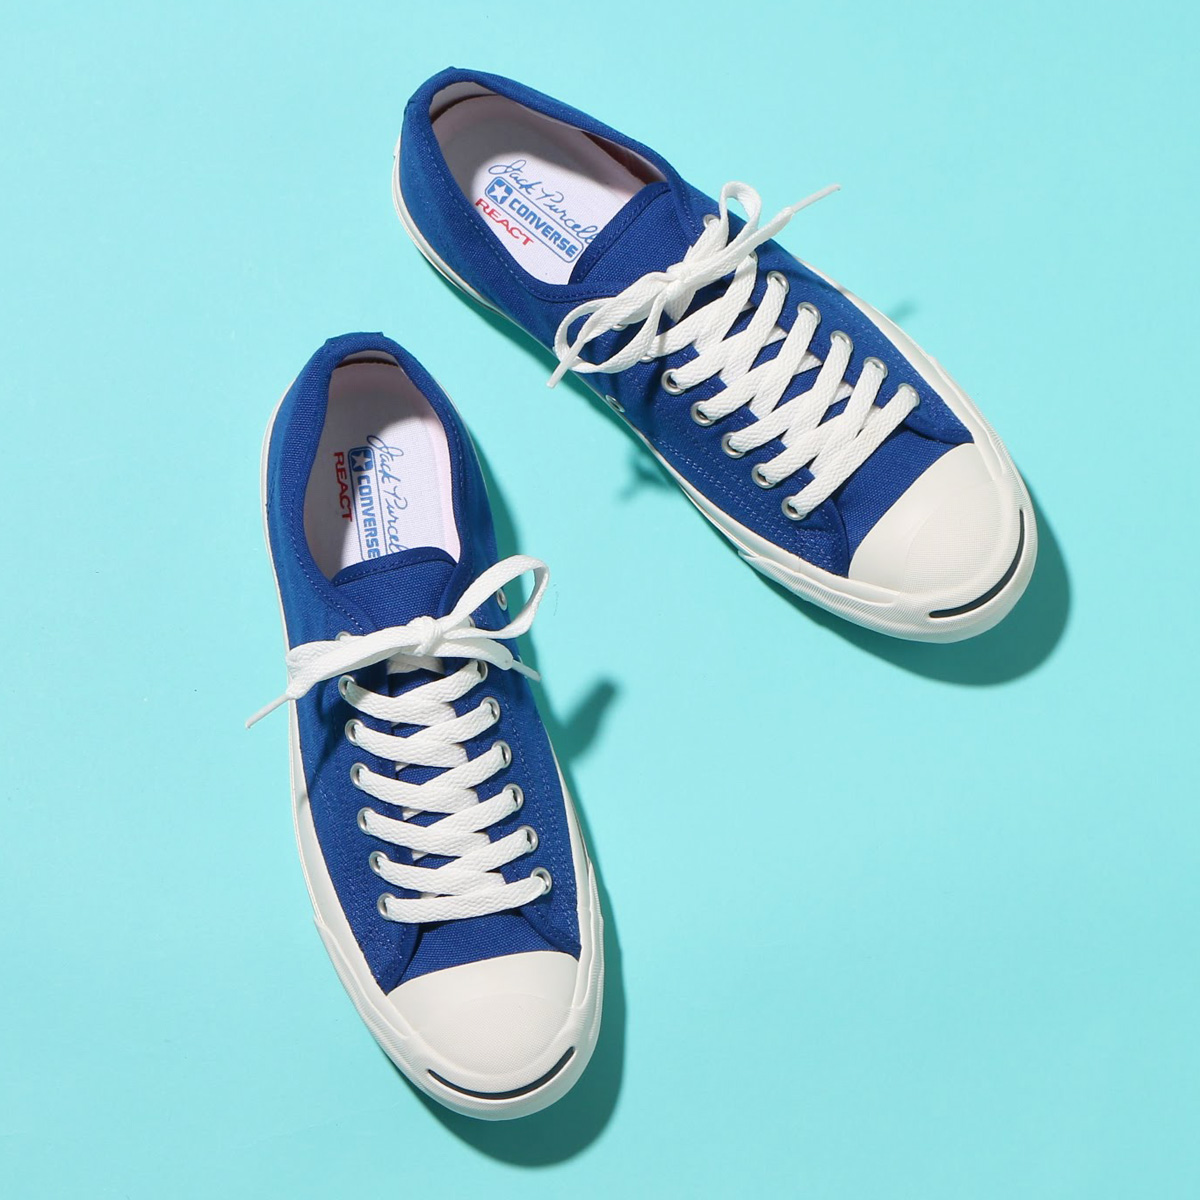 converse jack purcell colors r